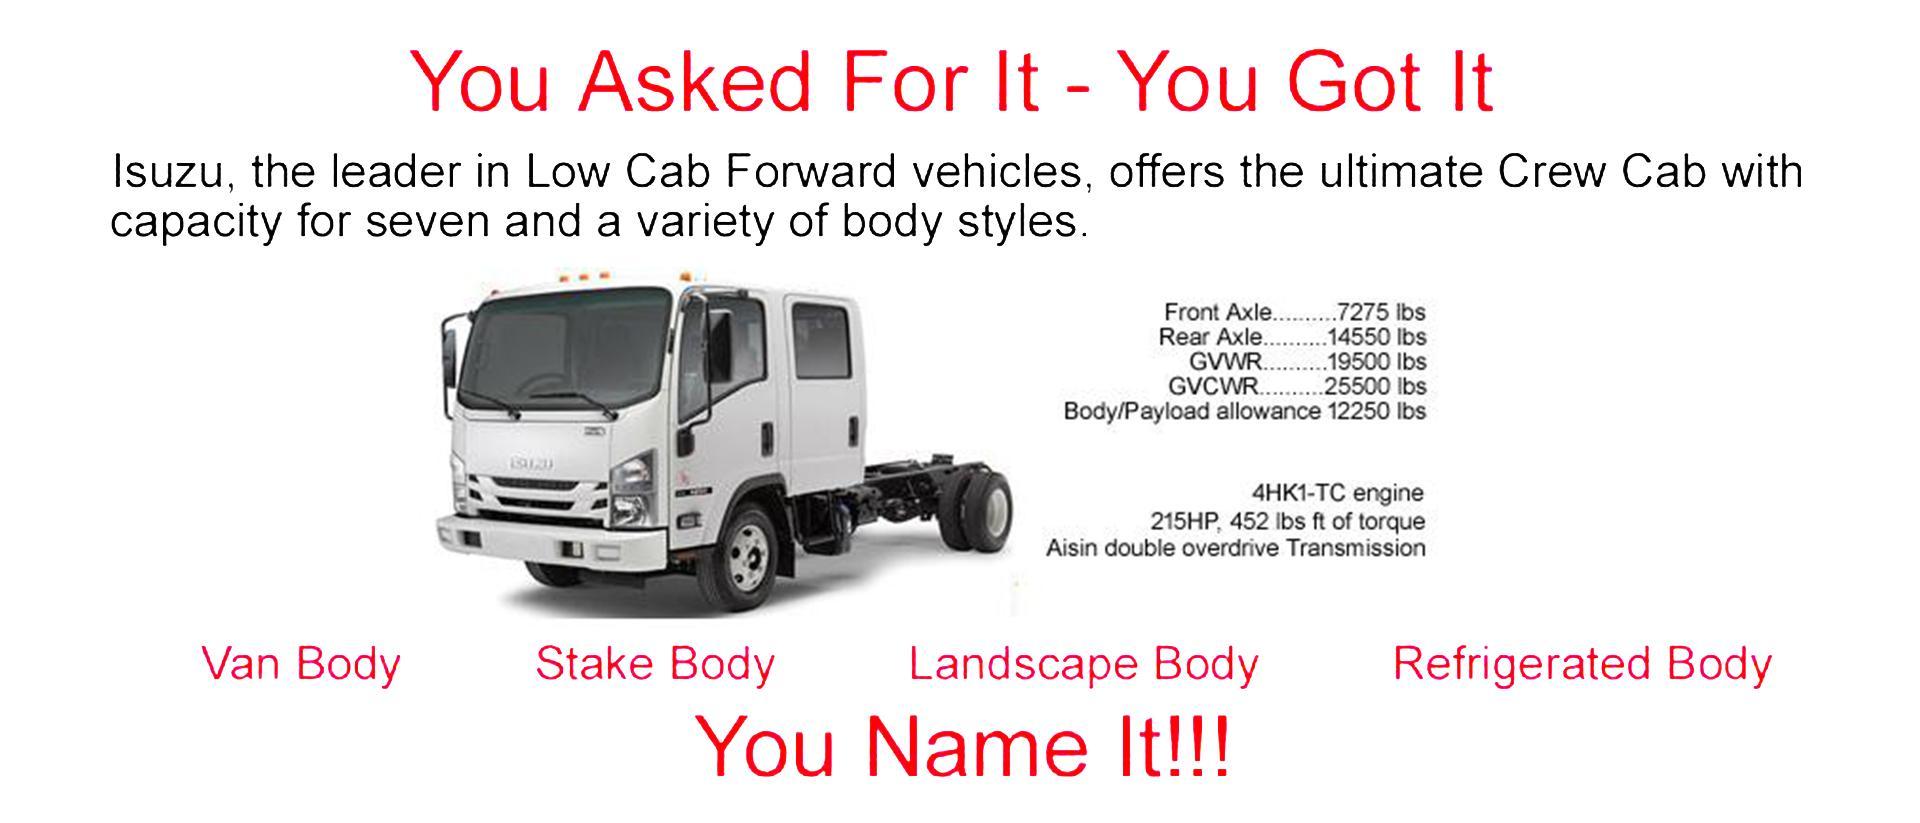 You Asked For It - You Got It | All State Ford &amp; Isuzu